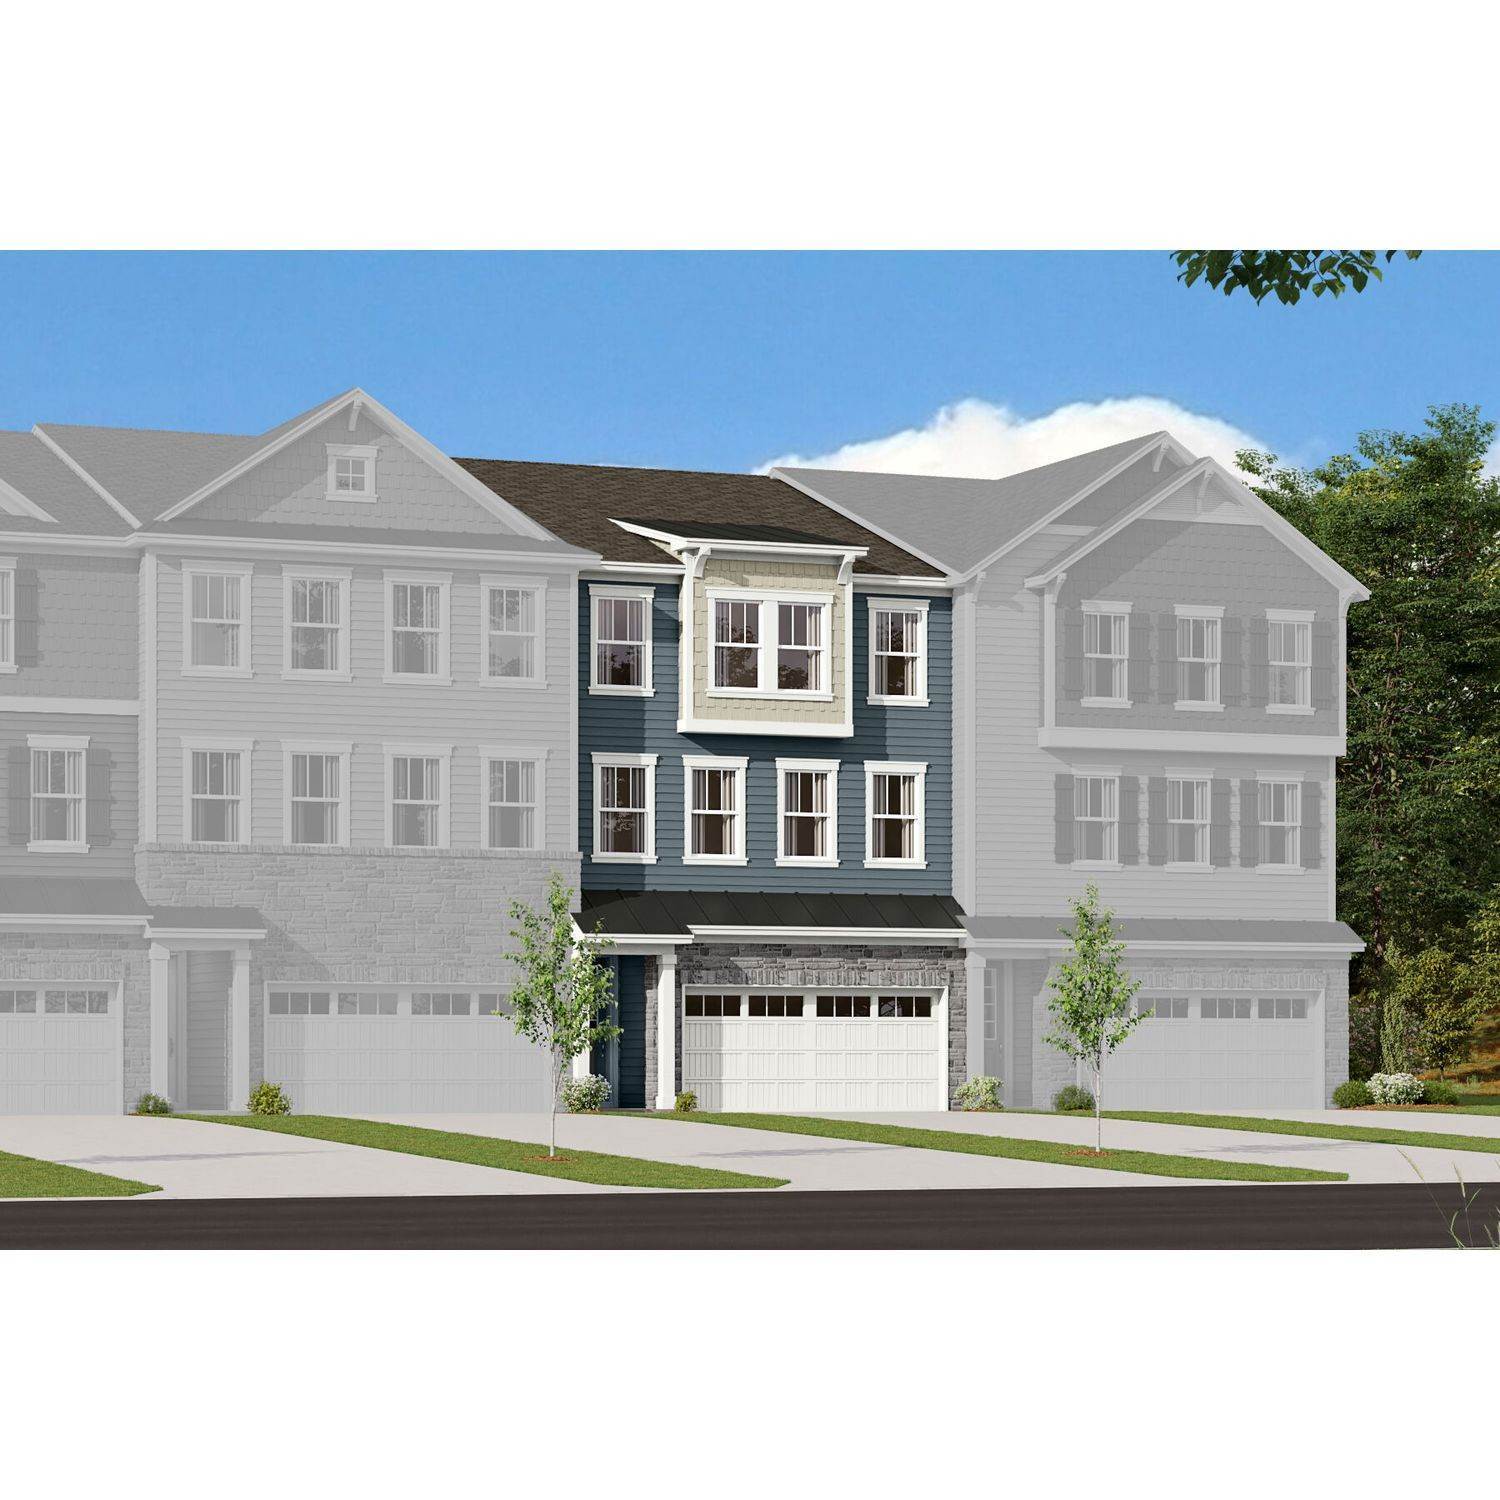 Multi Family for Sale at Indian Trail, NC 28079